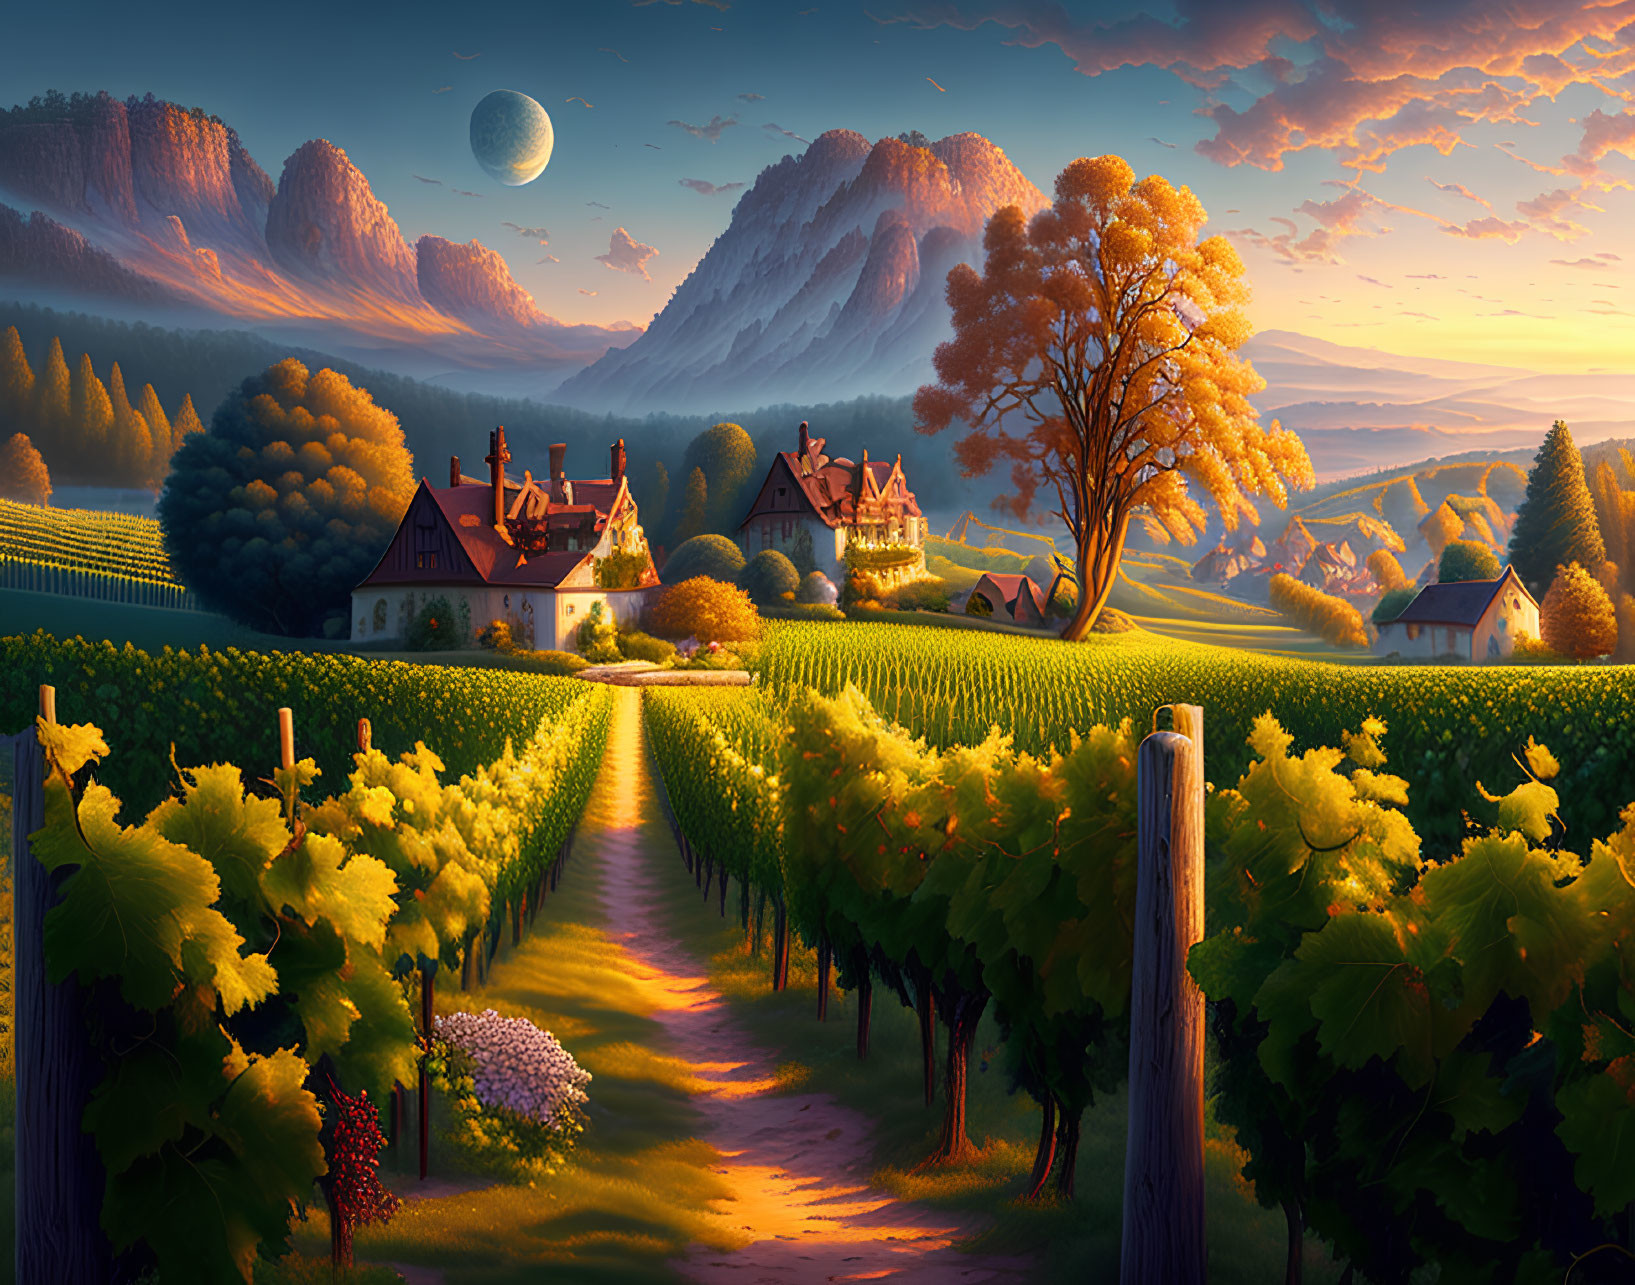 Tranquil vineyard landscape at sunset with crescent moon